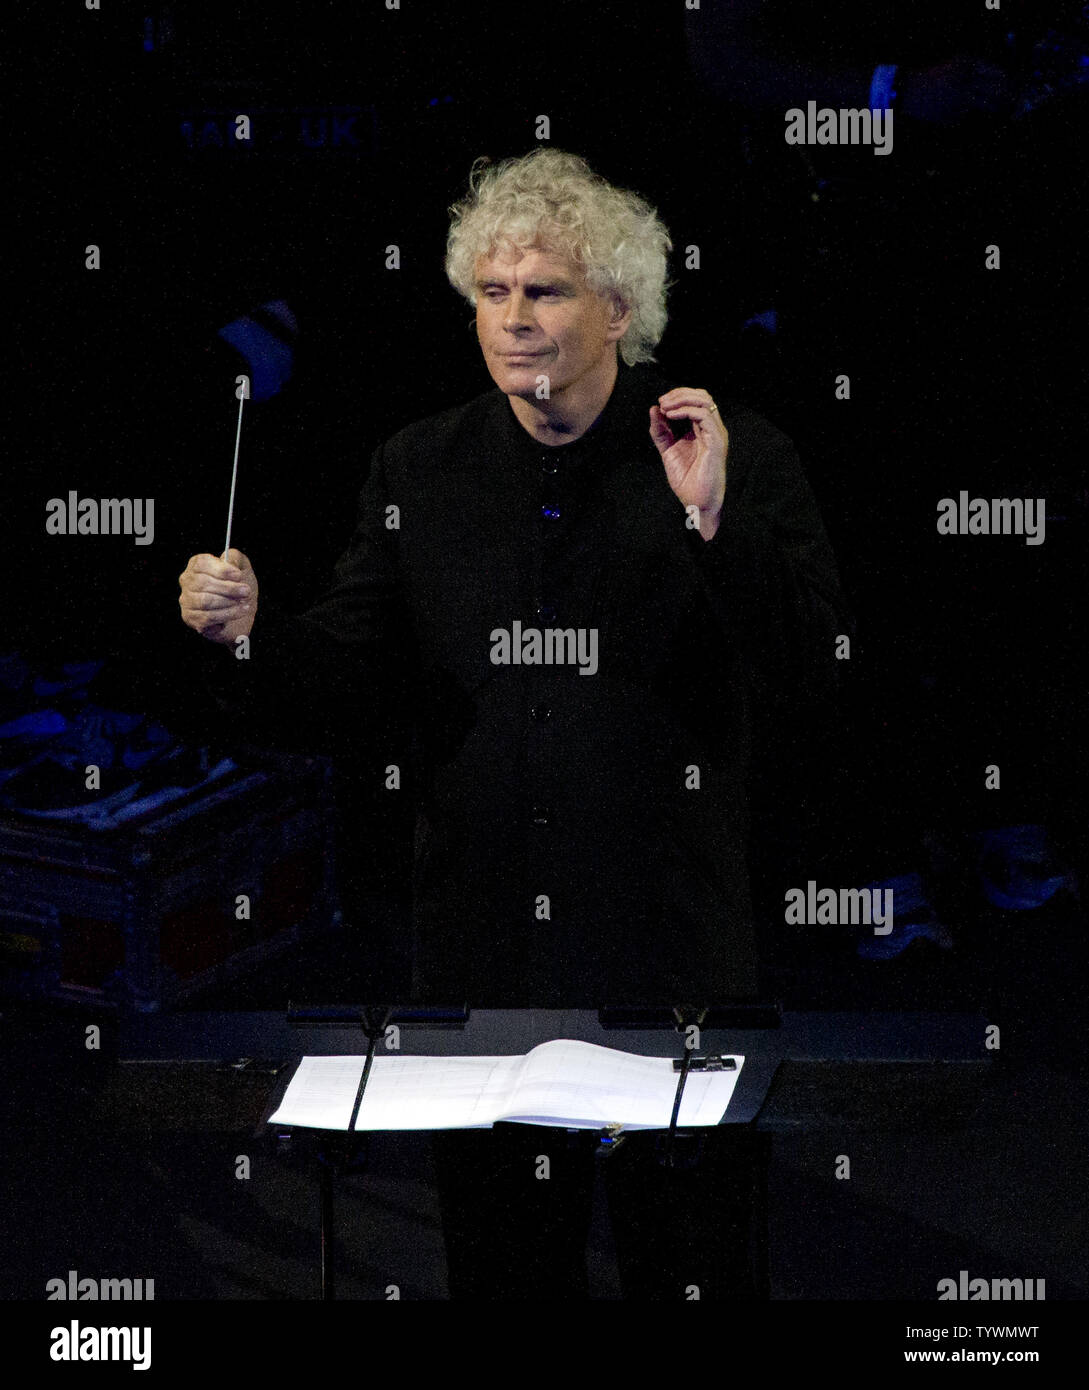 Sir Simon Rattle conducts the London Symphony Orchestra in a performance of 'Chariots of Fire' during the Opening Ceremony at the London 2012 Summer Olympic Games on July 27, 2012 in London.   UPI/Ron Sachs Stock Photo